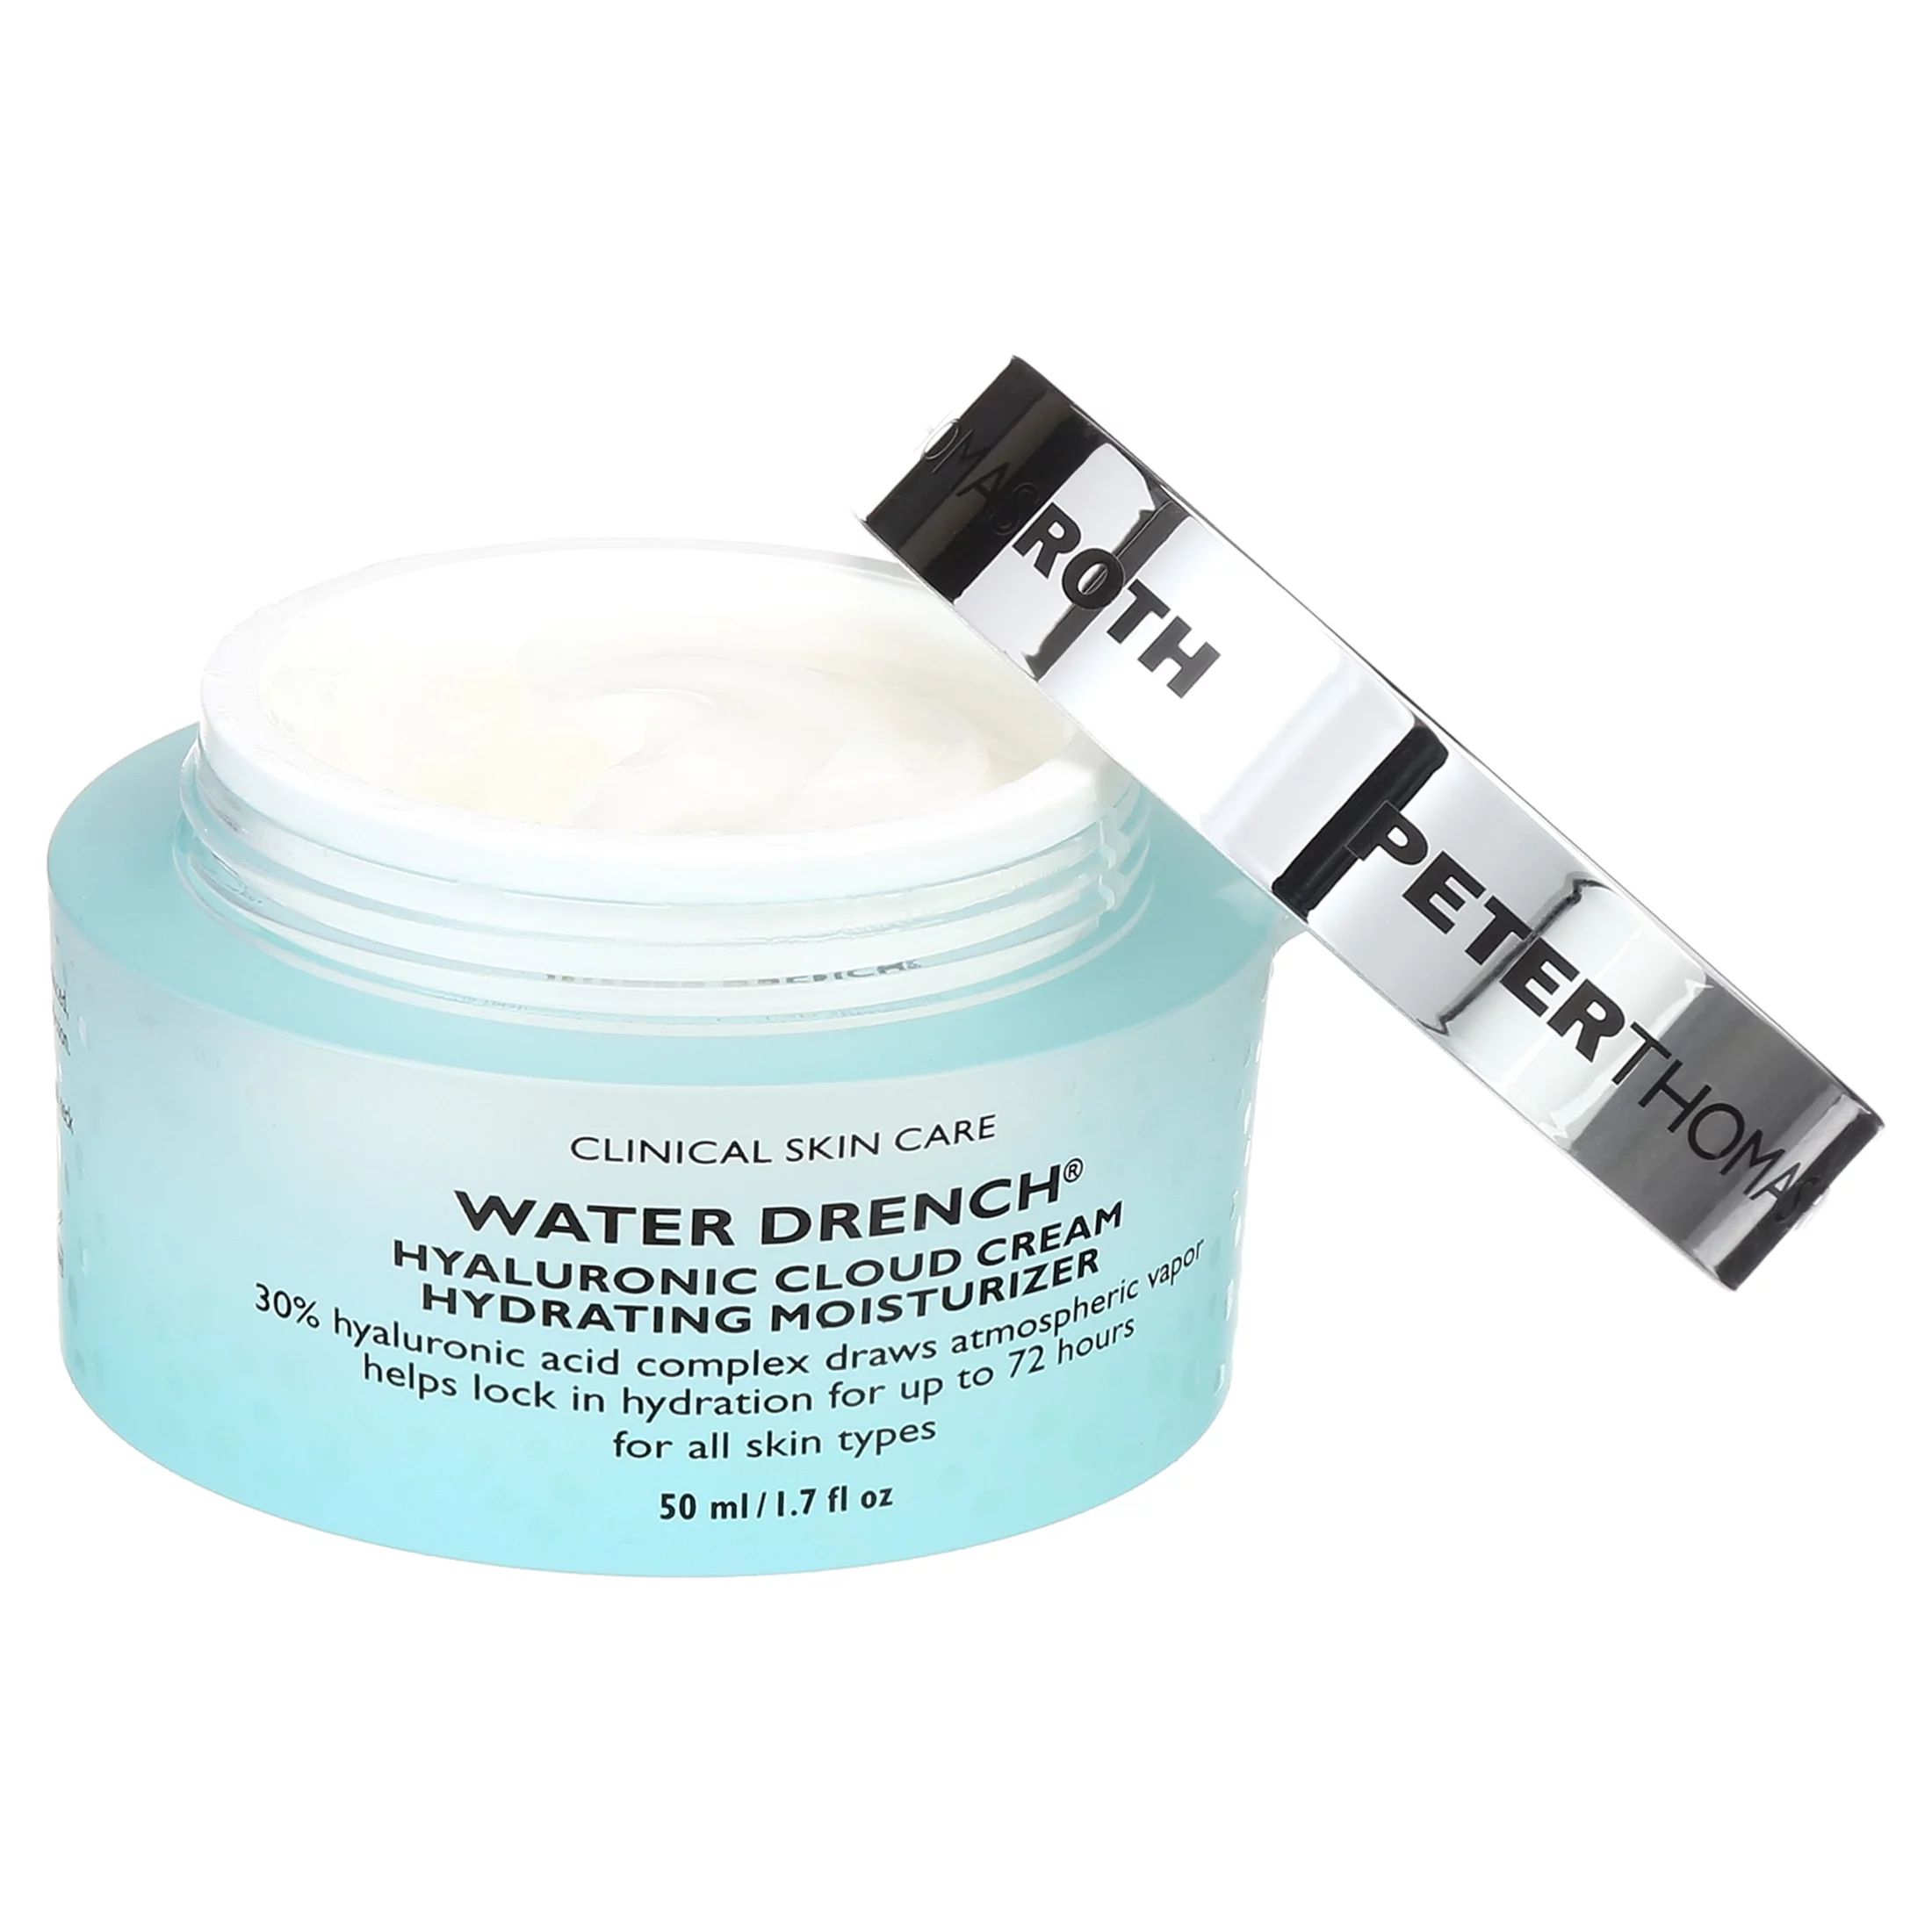 Peter Thomas Roth Water Drench Hyaluronic Cloud Cream Hydrating Moisturizer 1.7 oz | Walmart (US)